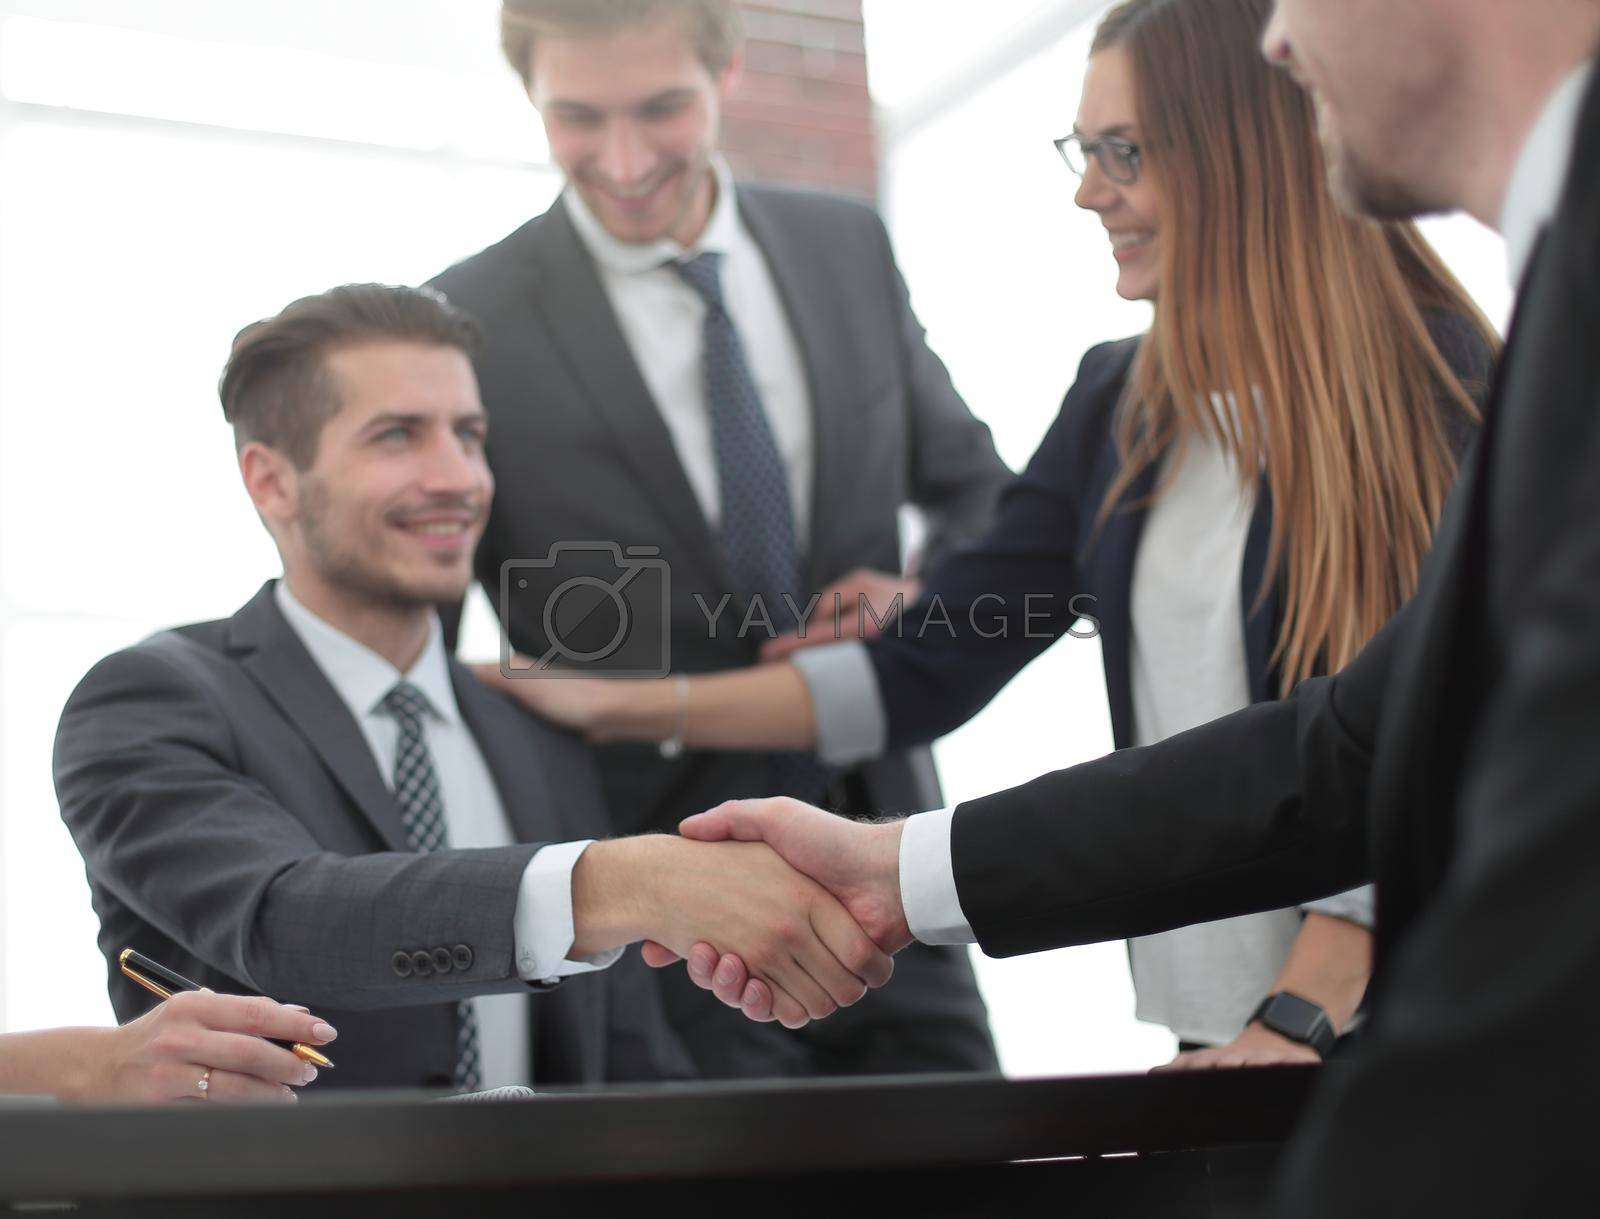 Royalty free image of Handshake between employees after the meeting by asdf